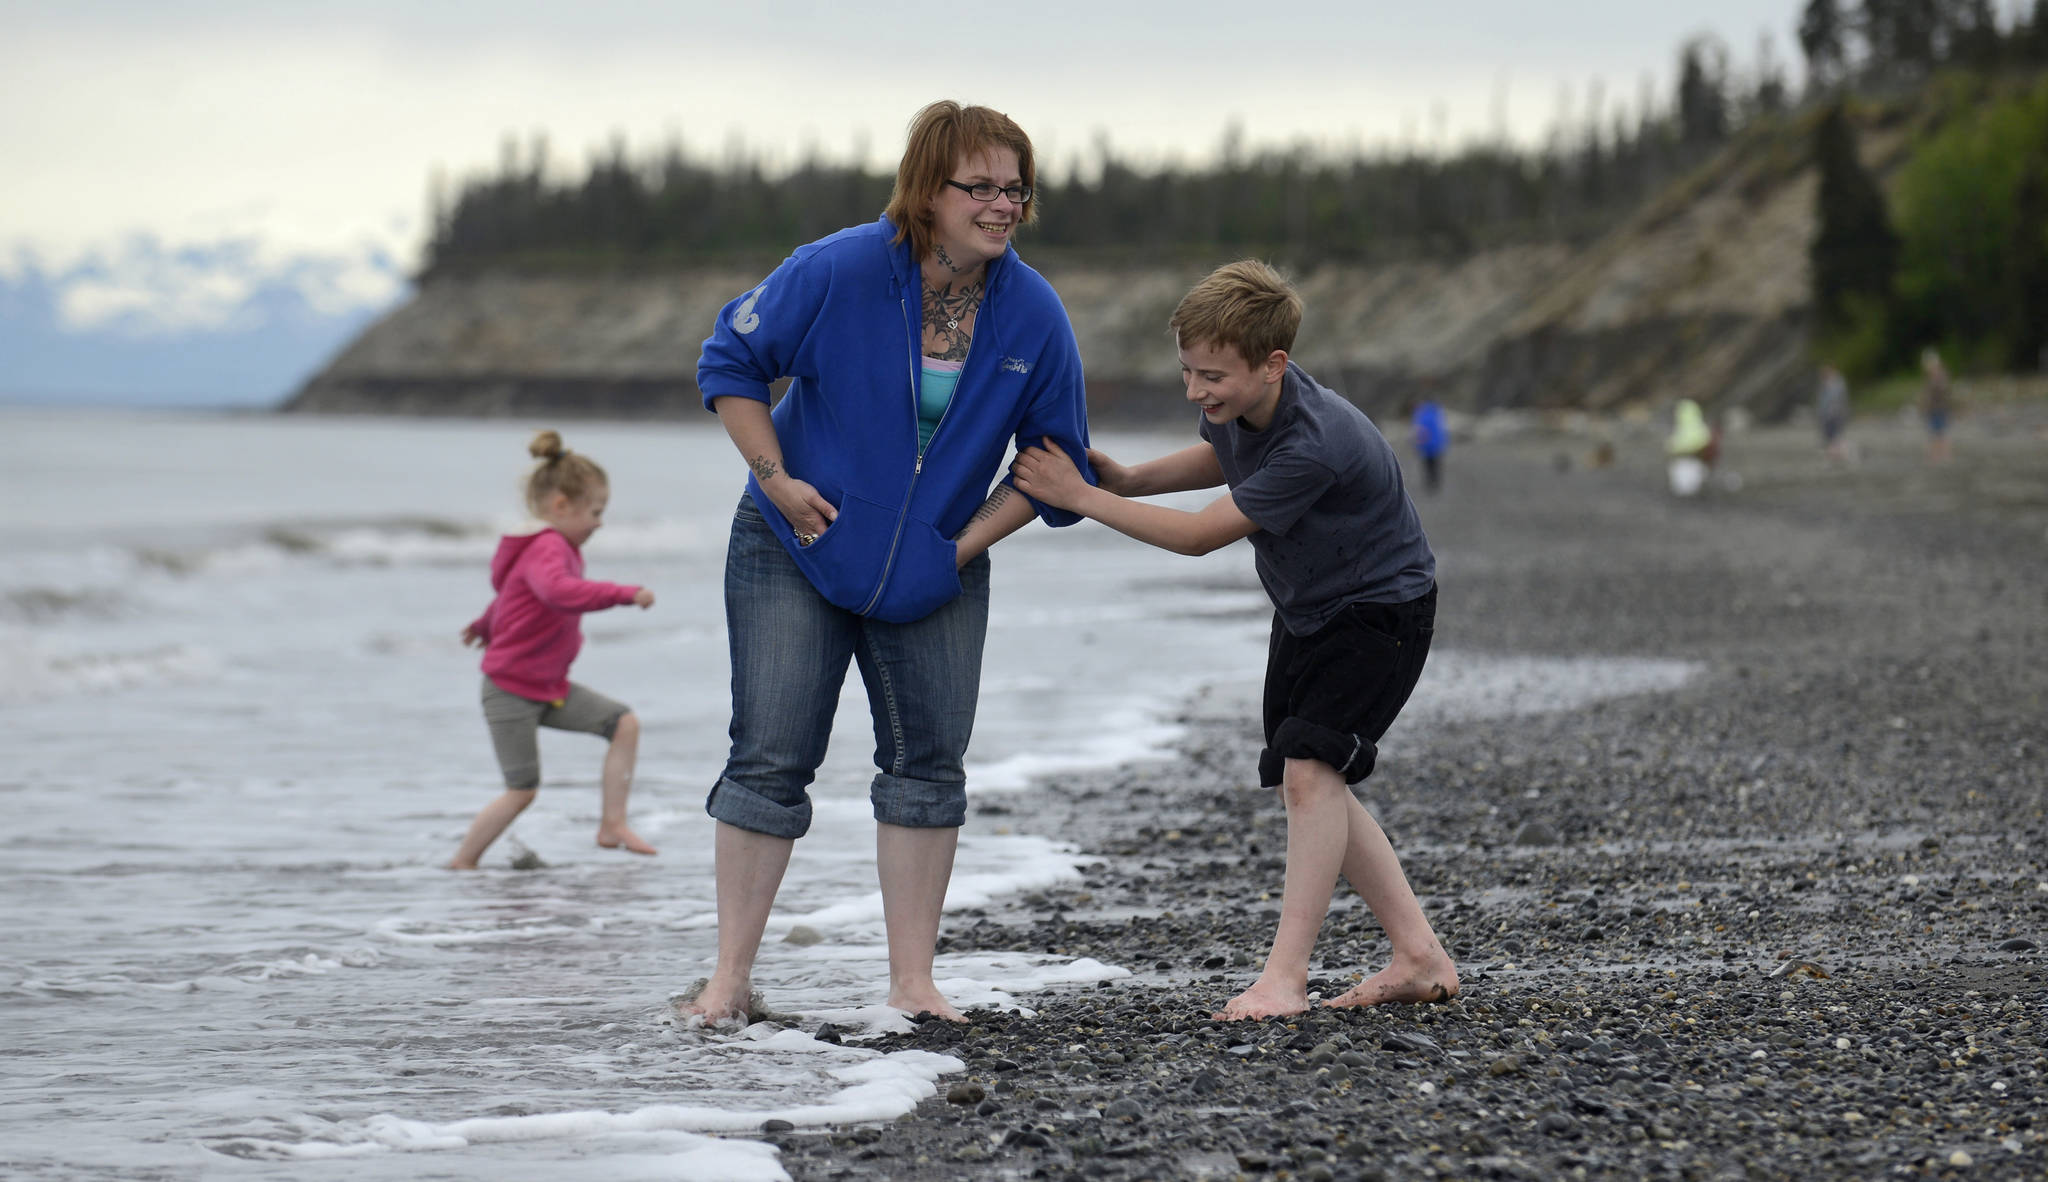 Carrie Gaethle and her children Ayla Gaethle (left) and Andrew Gaethle play in the surf on Kenai’s north beach on Tuesday, June 6, 2017 in Kenai. (Ben Boettger/Peninsula Clarion)